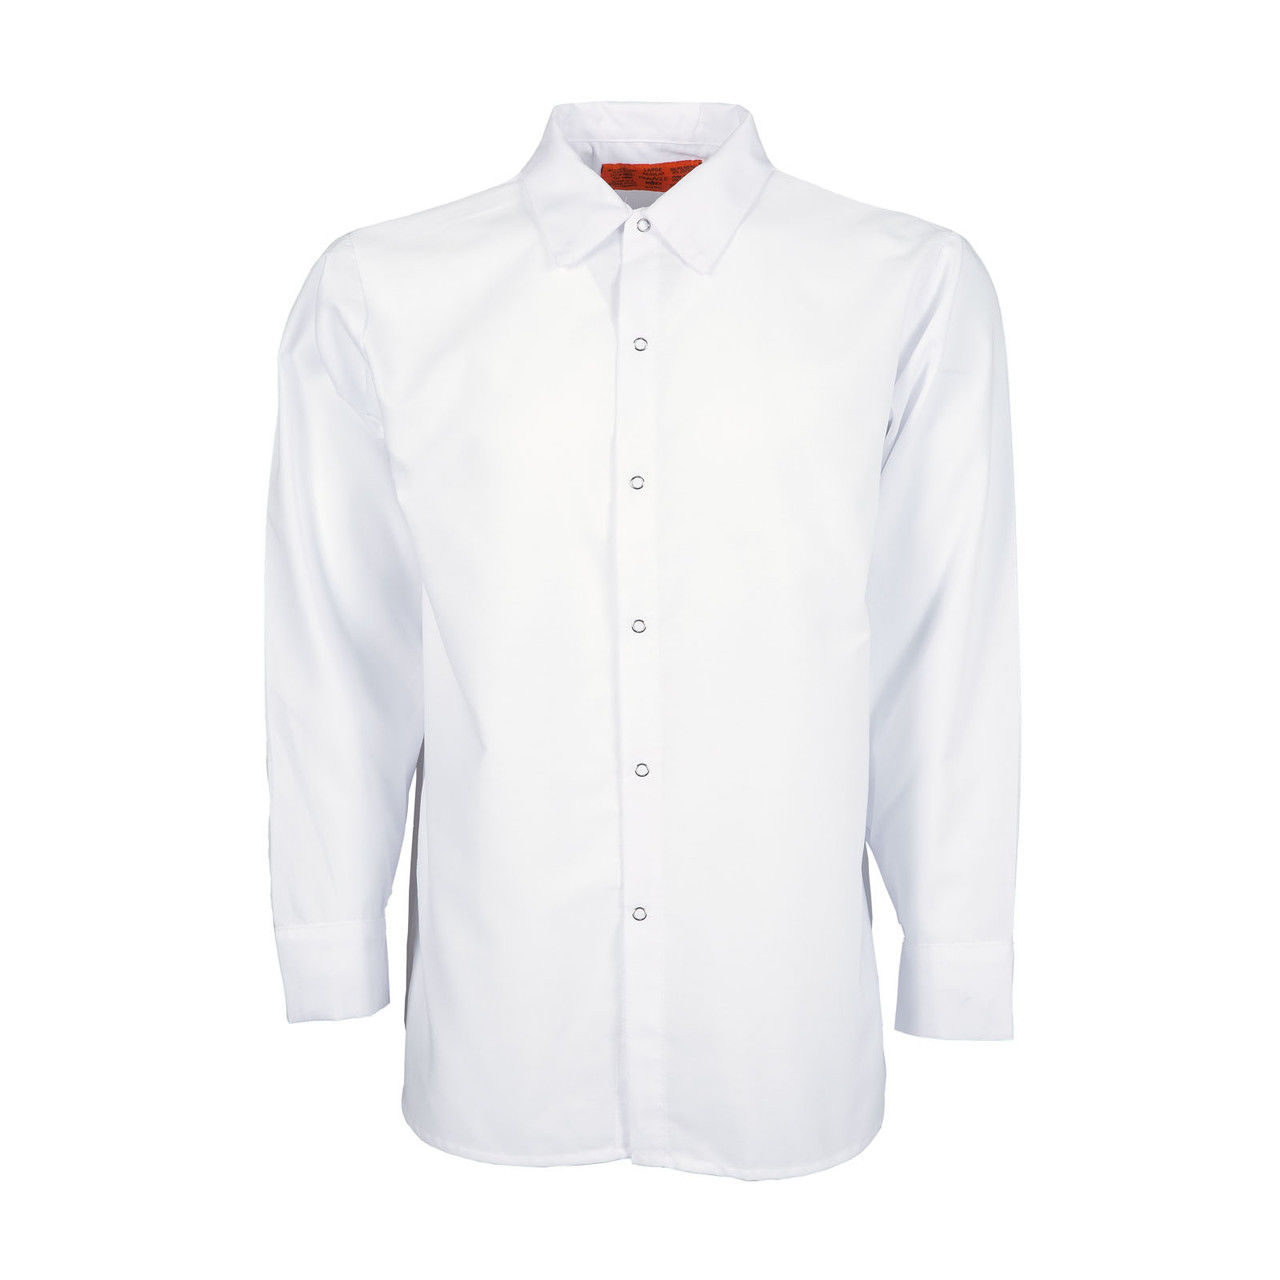 What's the durability and quality of white work shirts mens?